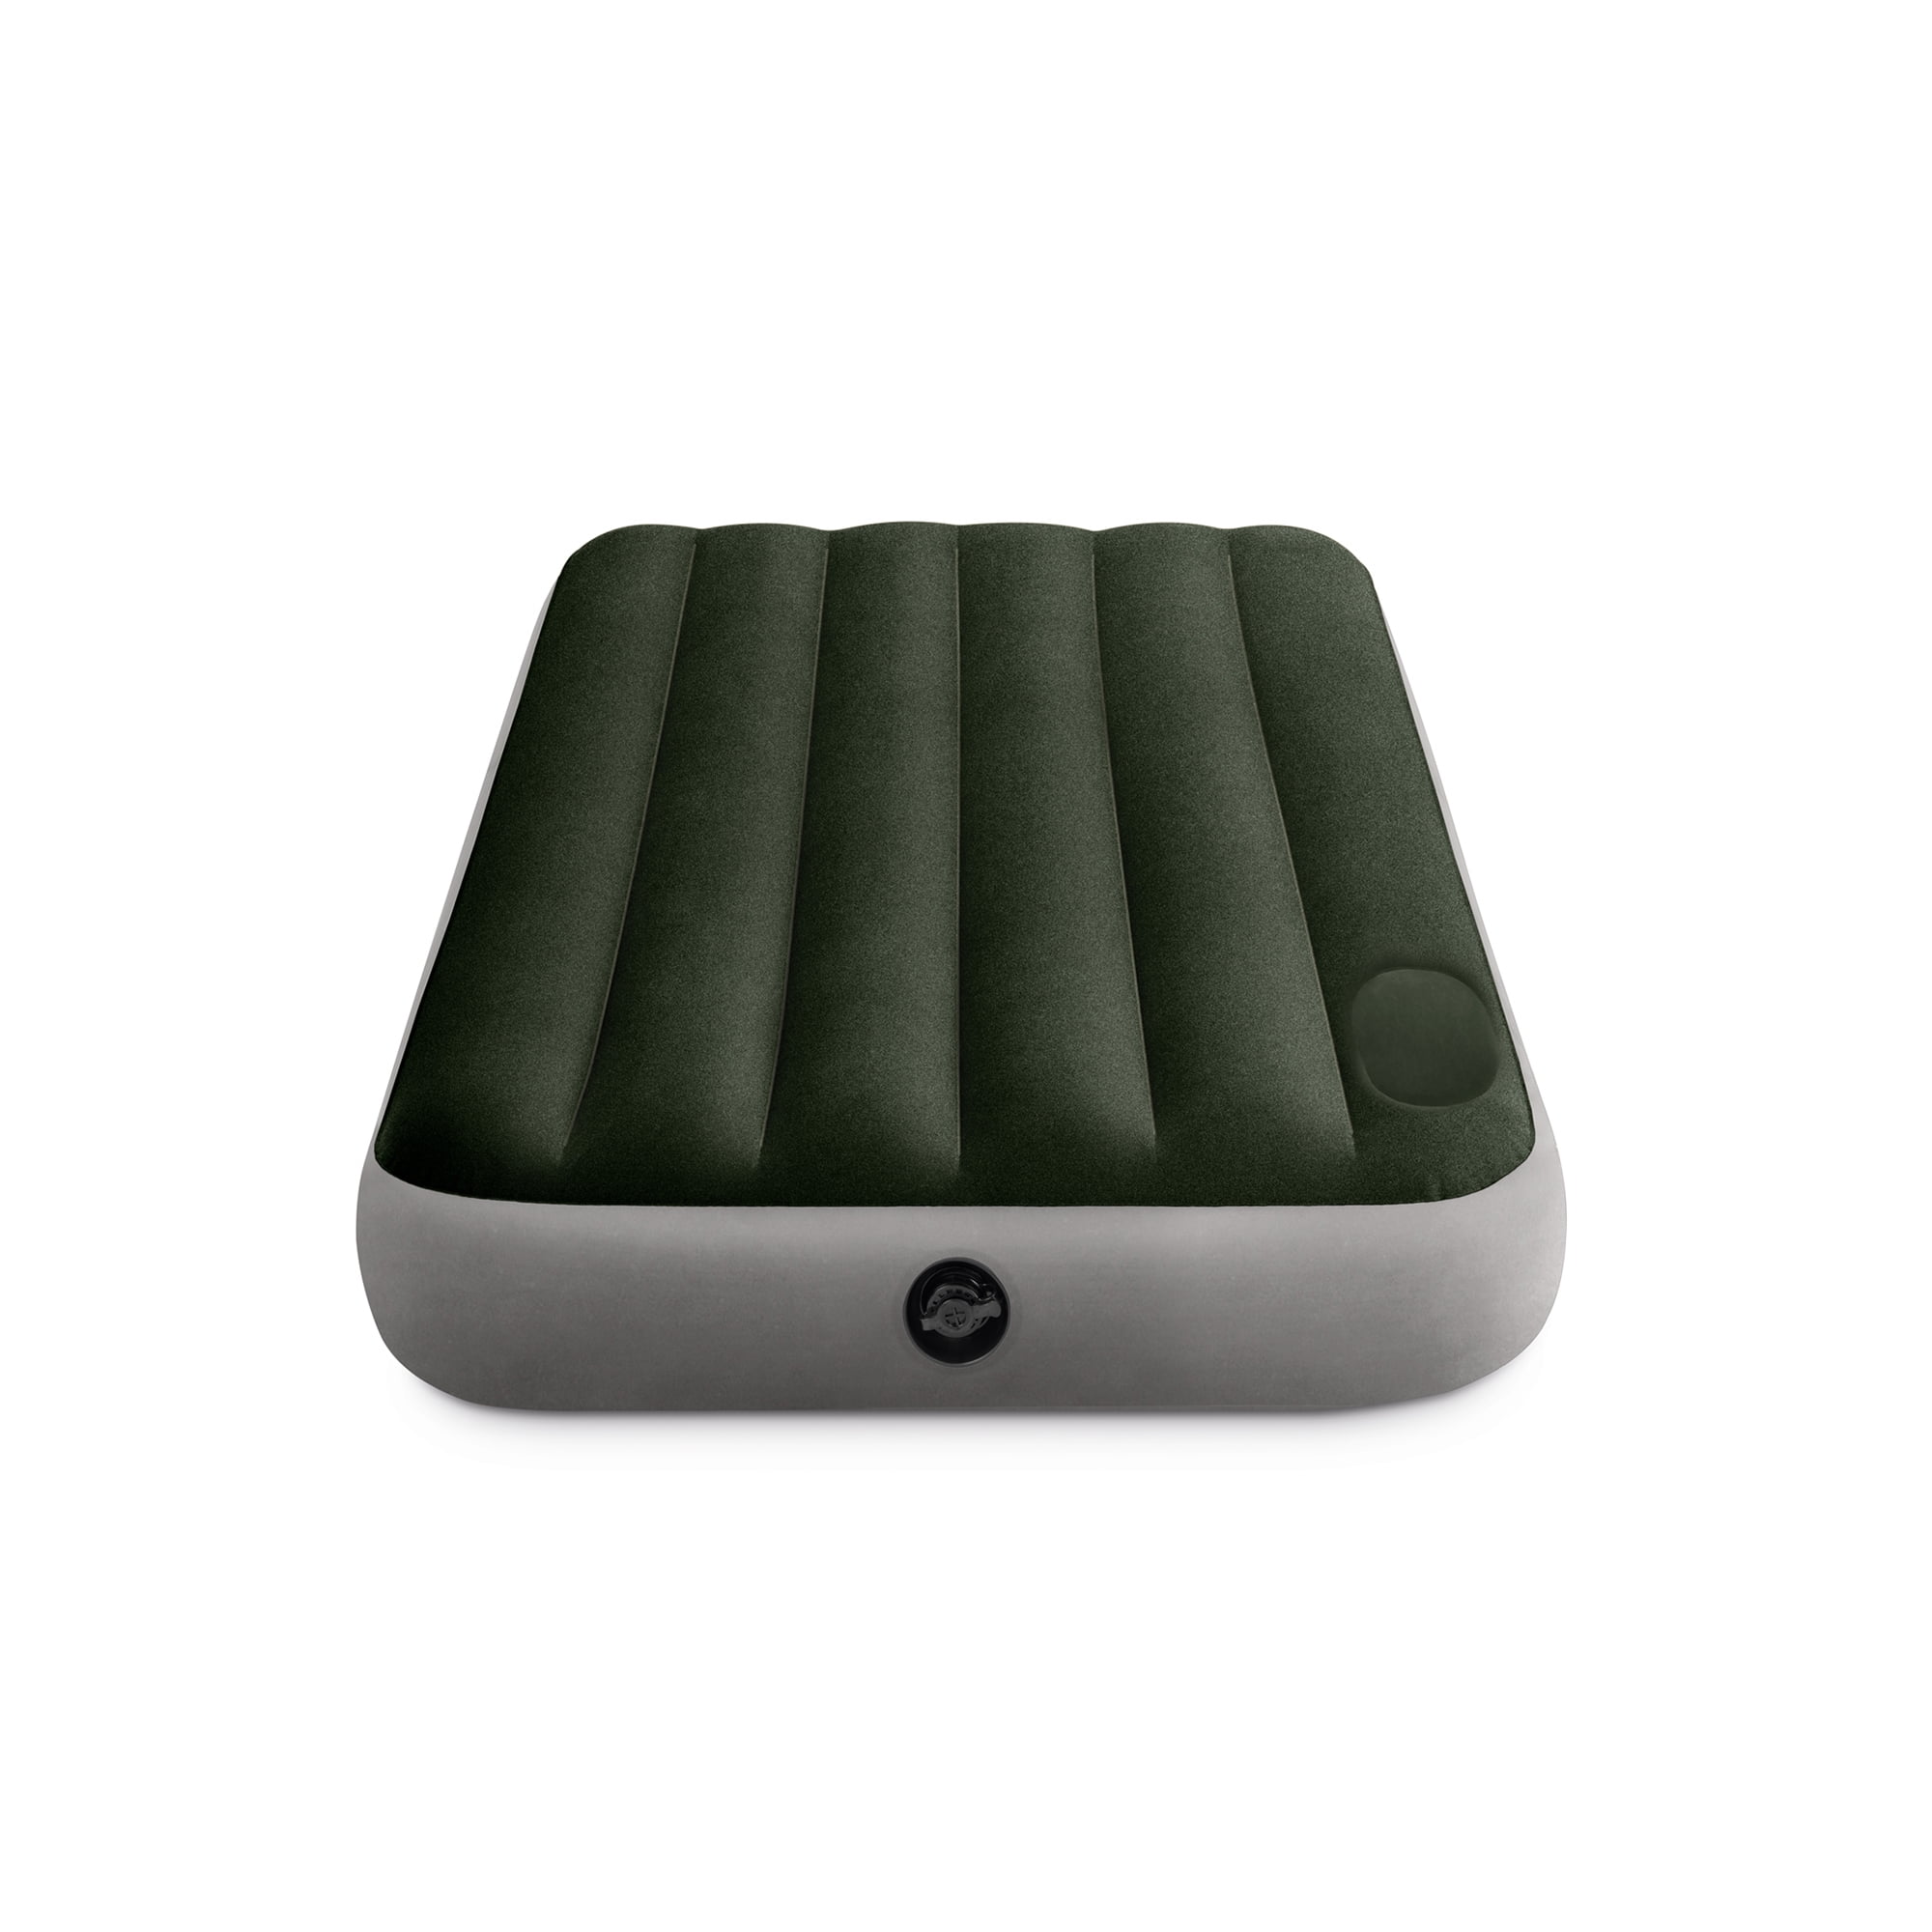 Intex PVC Dura-Beam Series Mid Rise Airbed with Built In Electric Pump Twin 